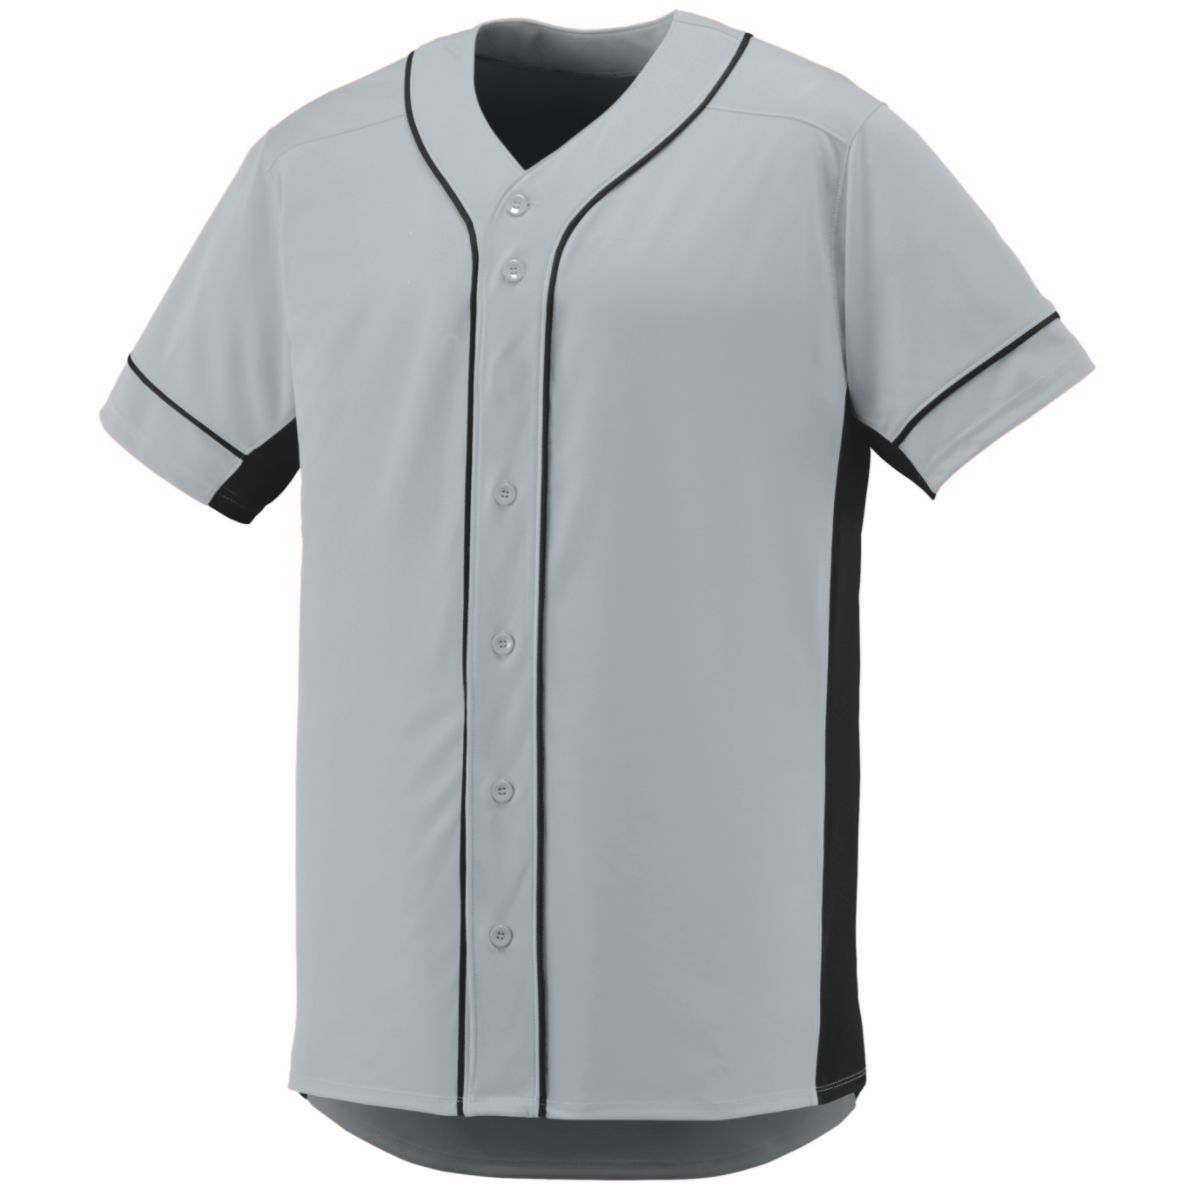 Augusta Sportswear Youth Slugger Jersey in Silver/Black  -Part of the Youth, Youth-Jersey, Augusta-Products, Baseball, Shirts, All-Sports, All-Sports-1 product lines at KanaleyCreations.com